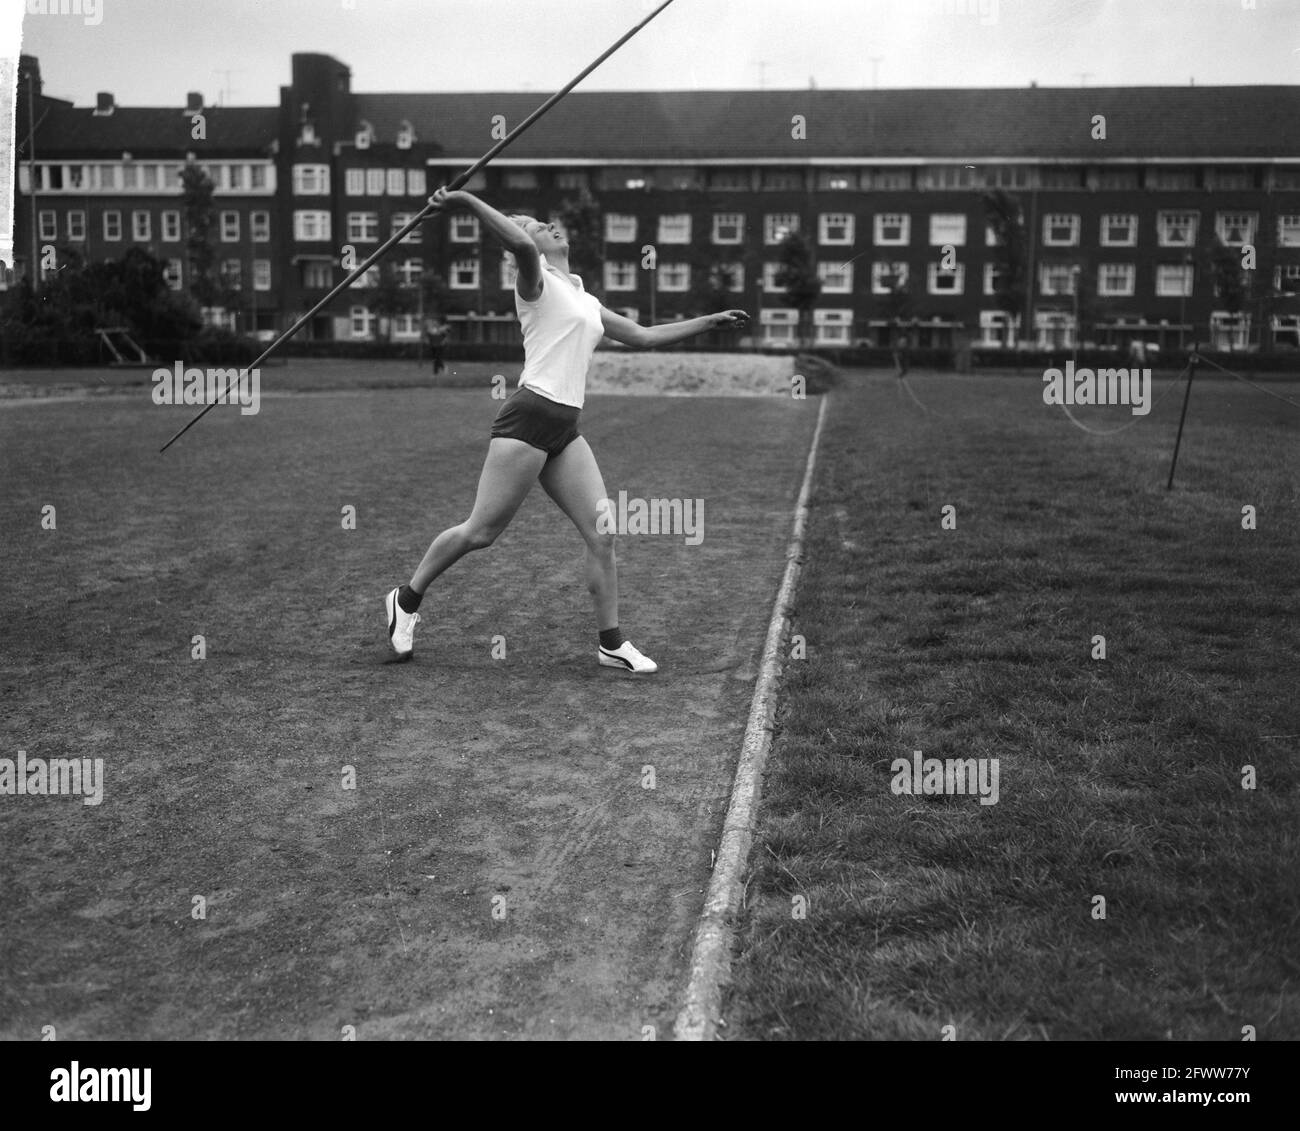 Assignment Cor du Buy (sports shoes), July 28, 1964, SPORTS SHOES,  athletics, javelin throw, The Netherlands, 20th century press agency photo,  news to remember, documentary, historic photography 1945-1990, visual  stories, human history